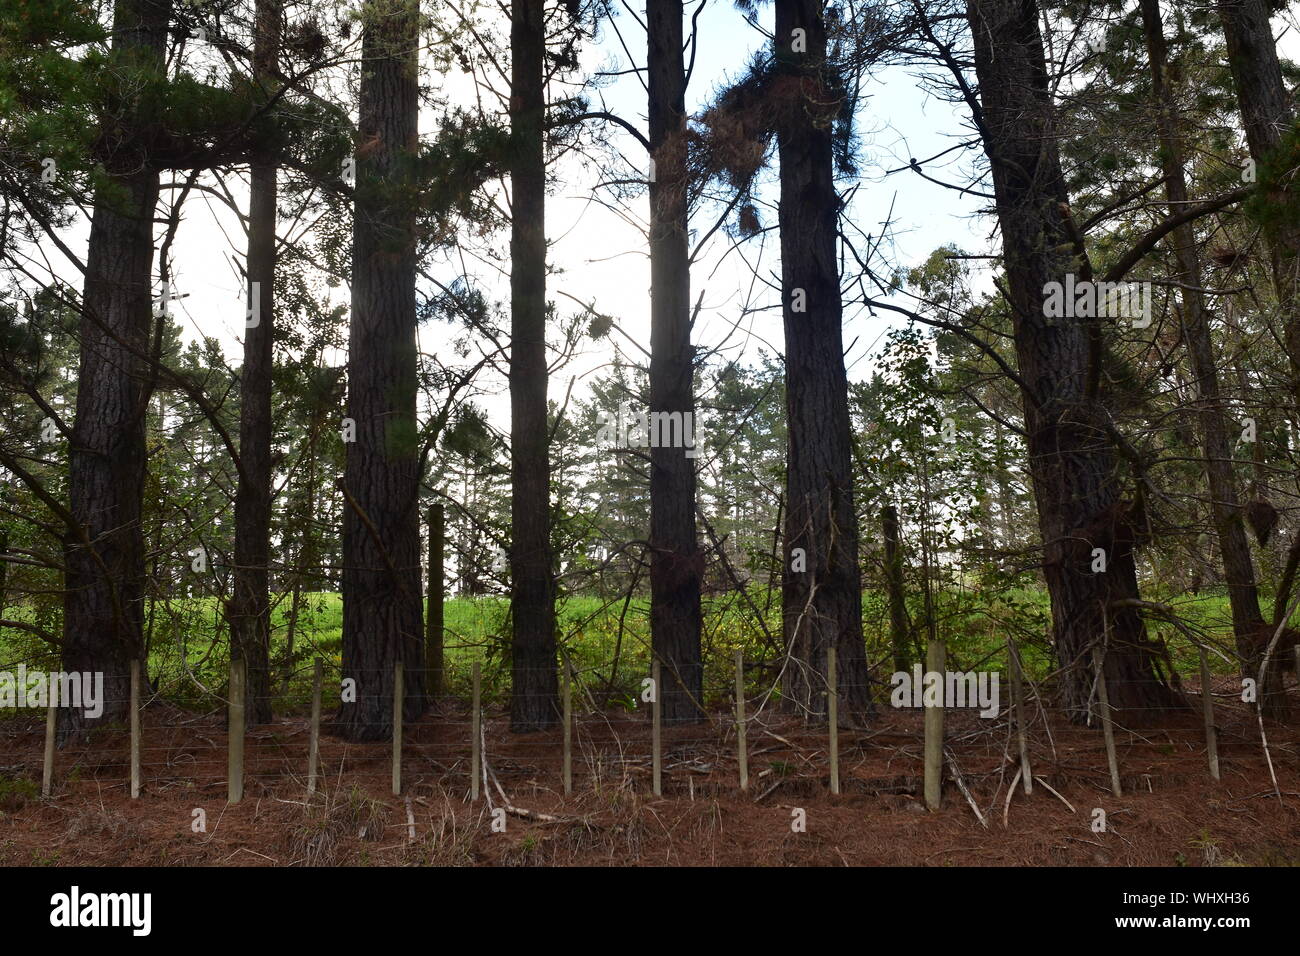 Tall pines standing in row behind livestock wire fence with fresh green pasture behind them. Stock Photo